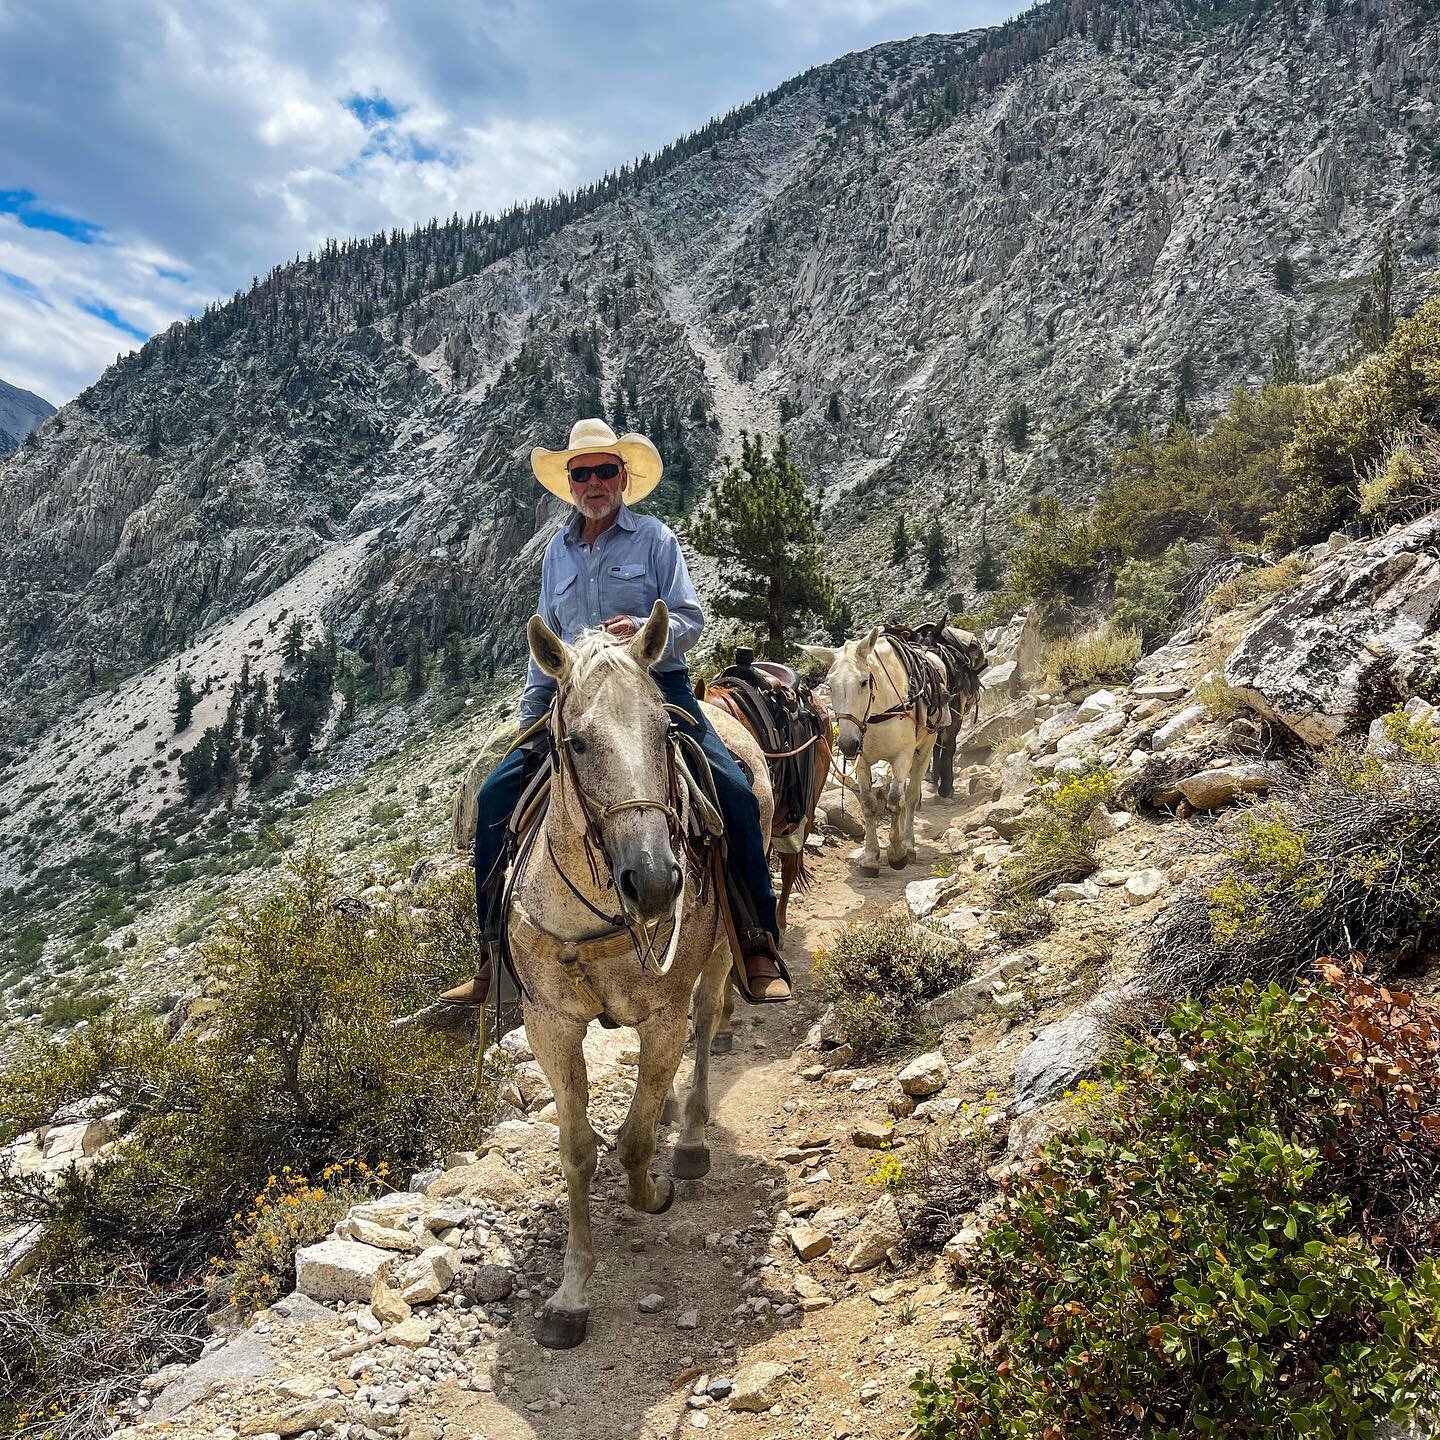 Ok, one more because I forgot to show this shot of one of my favorite folks we met on the trail. For a brief moment, we felt like we were in an episode of Yellowstone (if you haven&rsquo;t watched it yet, binge it now!). As he rode by he said, &ldquo